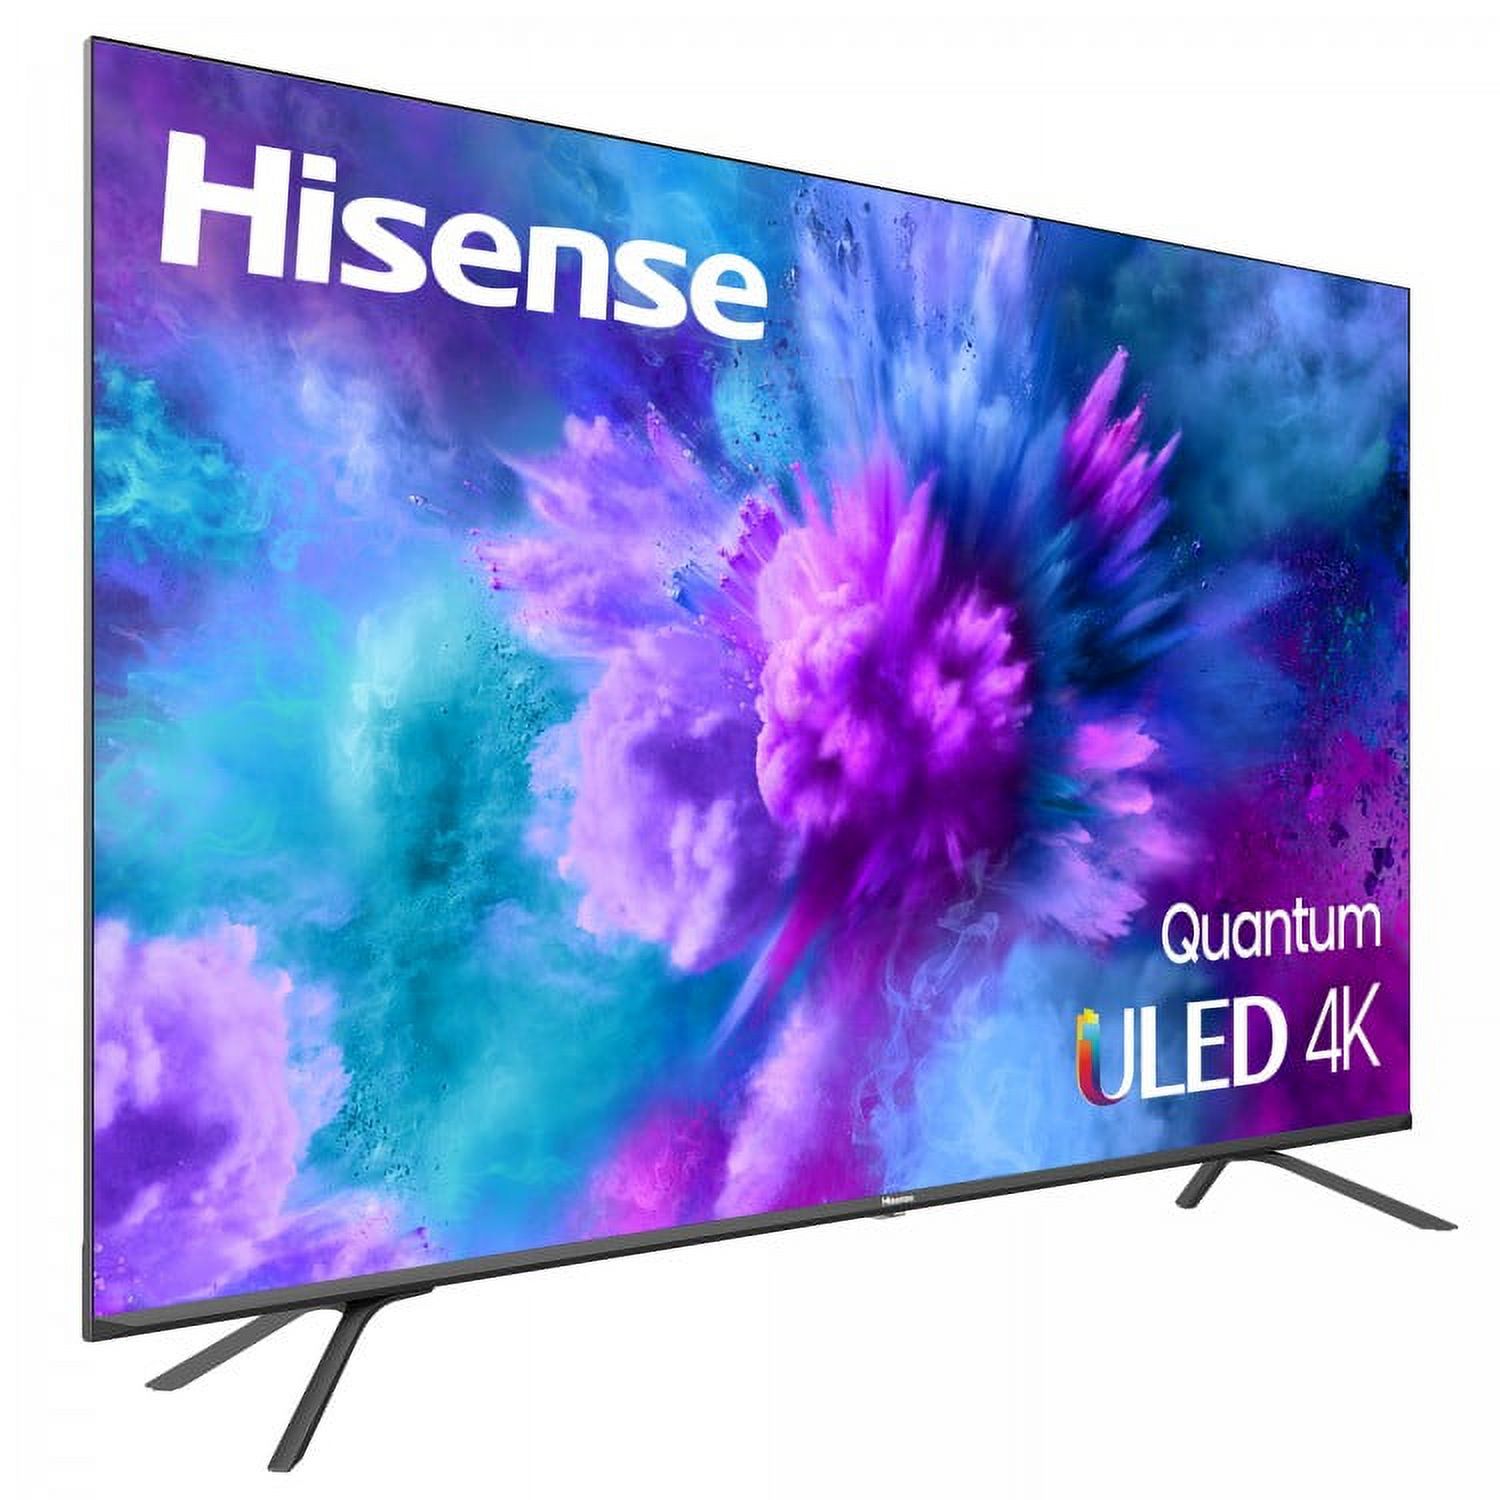 Hisense 55H8G1 - 55" H8 Quantum Series Android TV Support - image 1 of 2